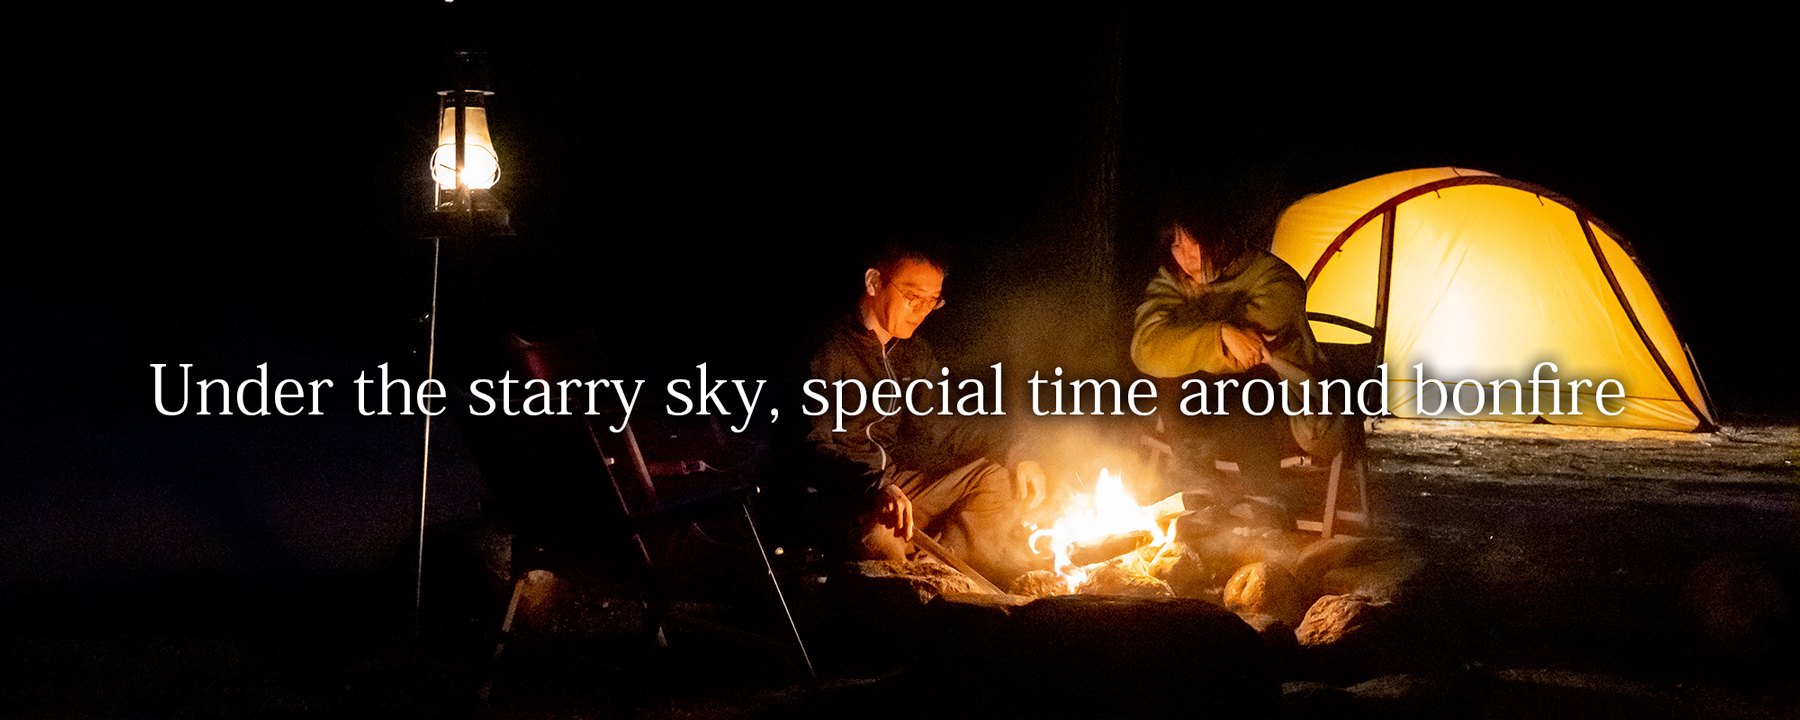 Under the starry sky, special time around bonfire 